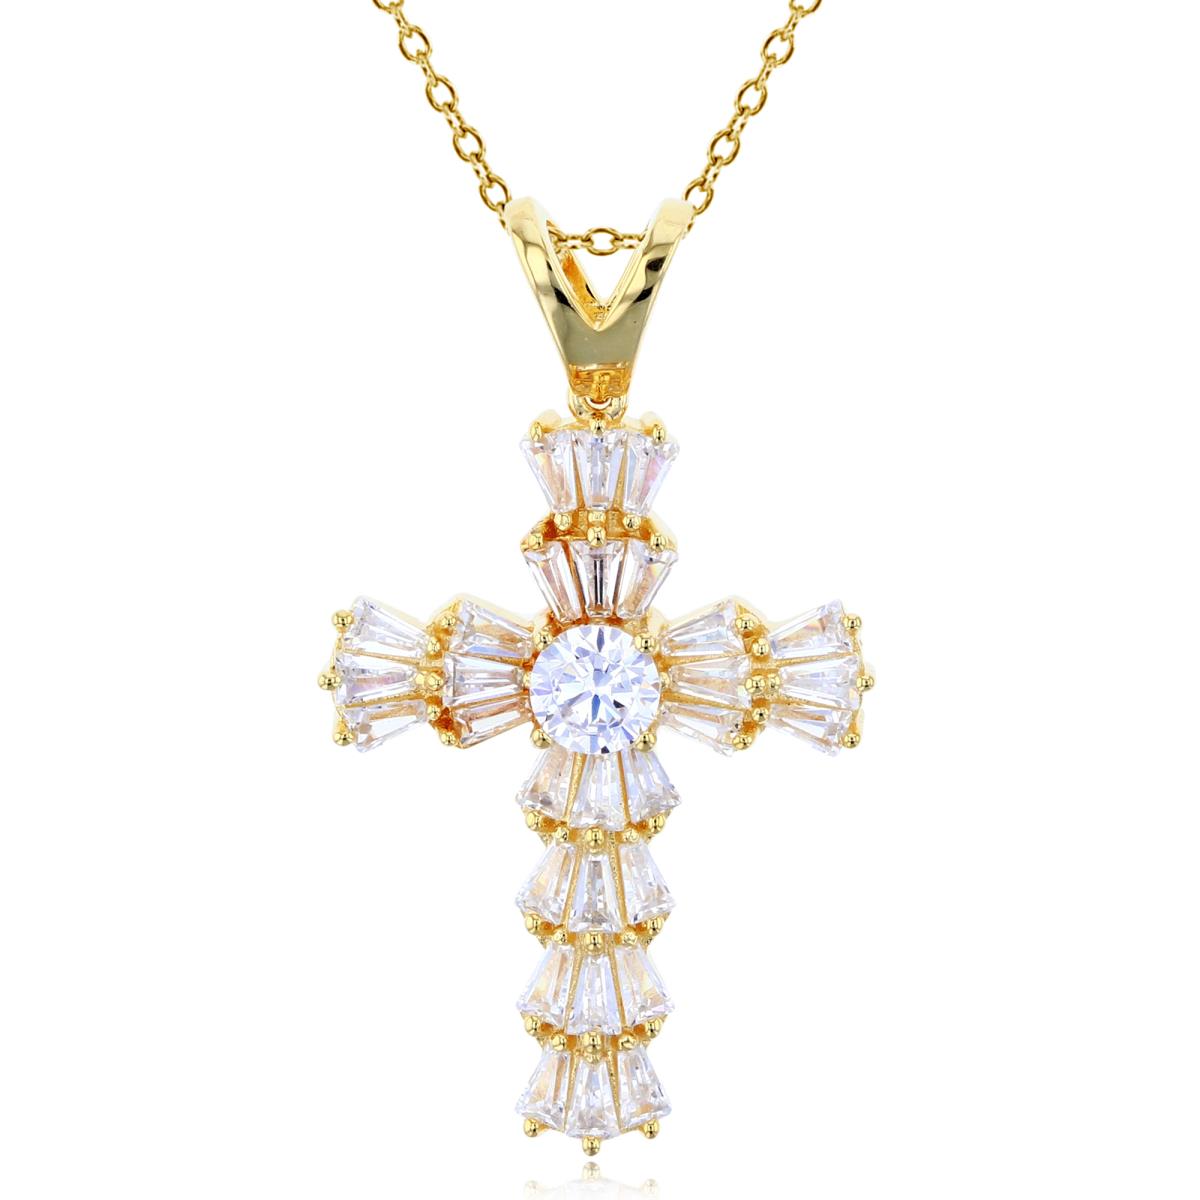 Sterling Silver+1Micron Yellow Gold 4.75mm Rnd CZ Center & TB CZ Layered Fancy Cross 18"Necklace